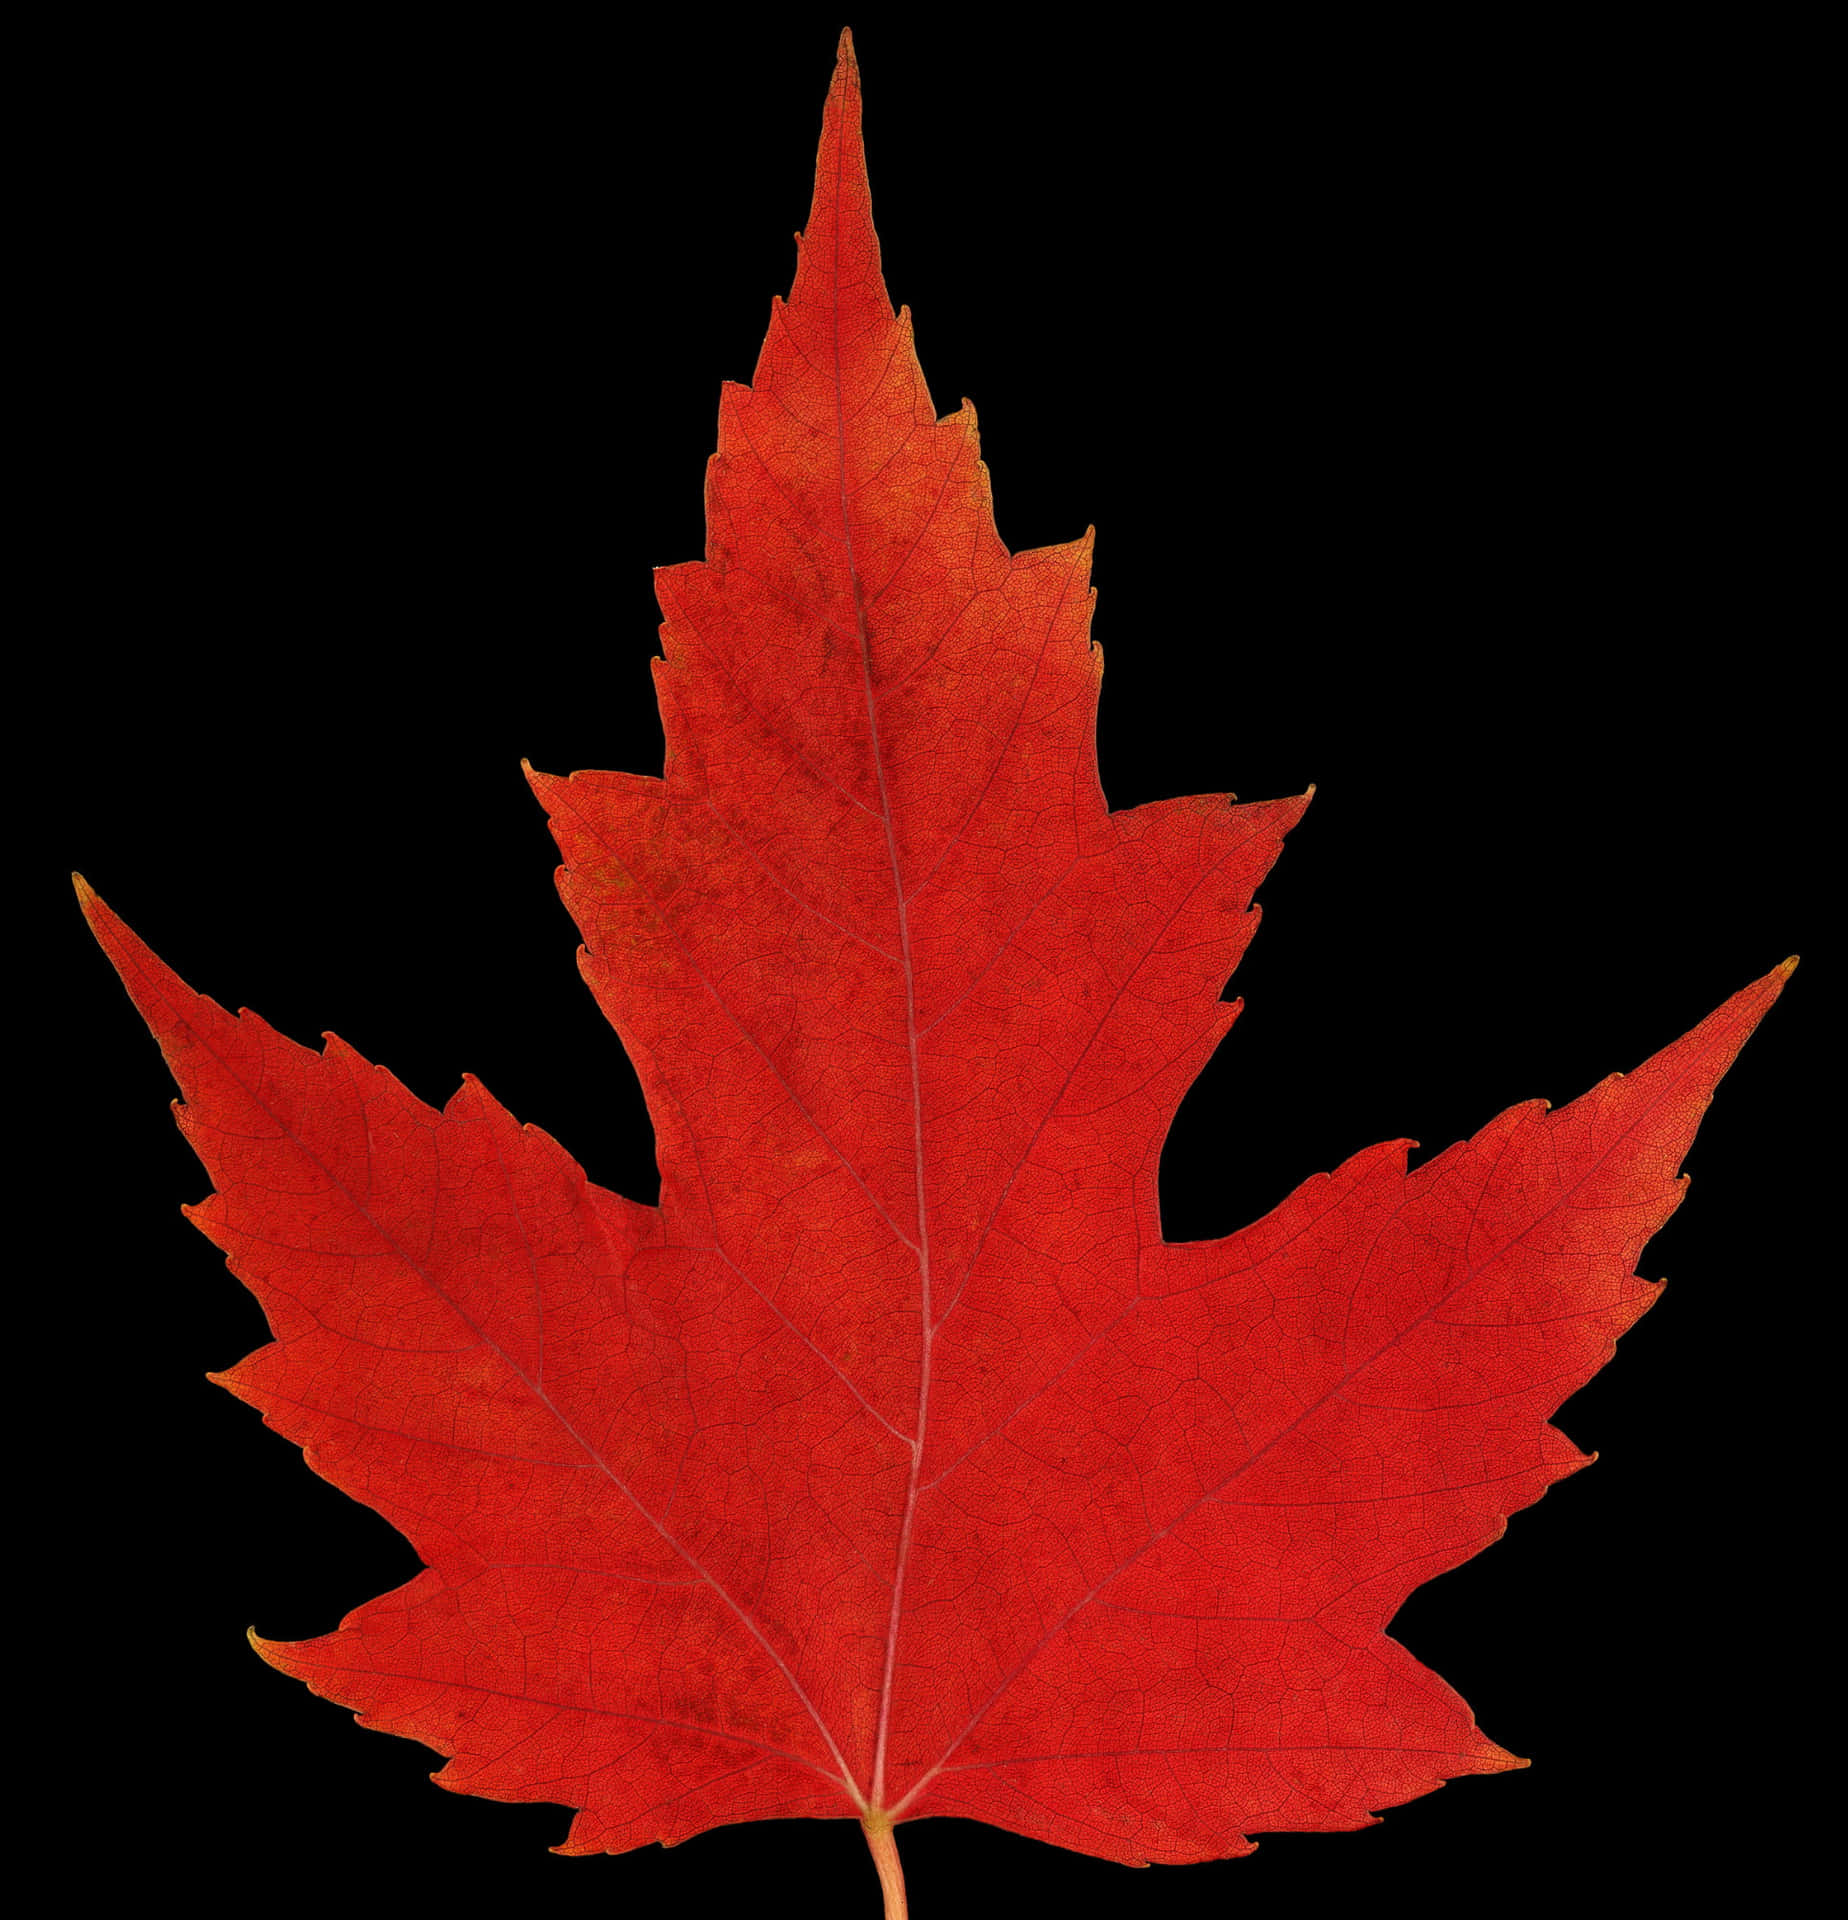 Shining with Autumn's beauty, the maple leaf glows in the sun.